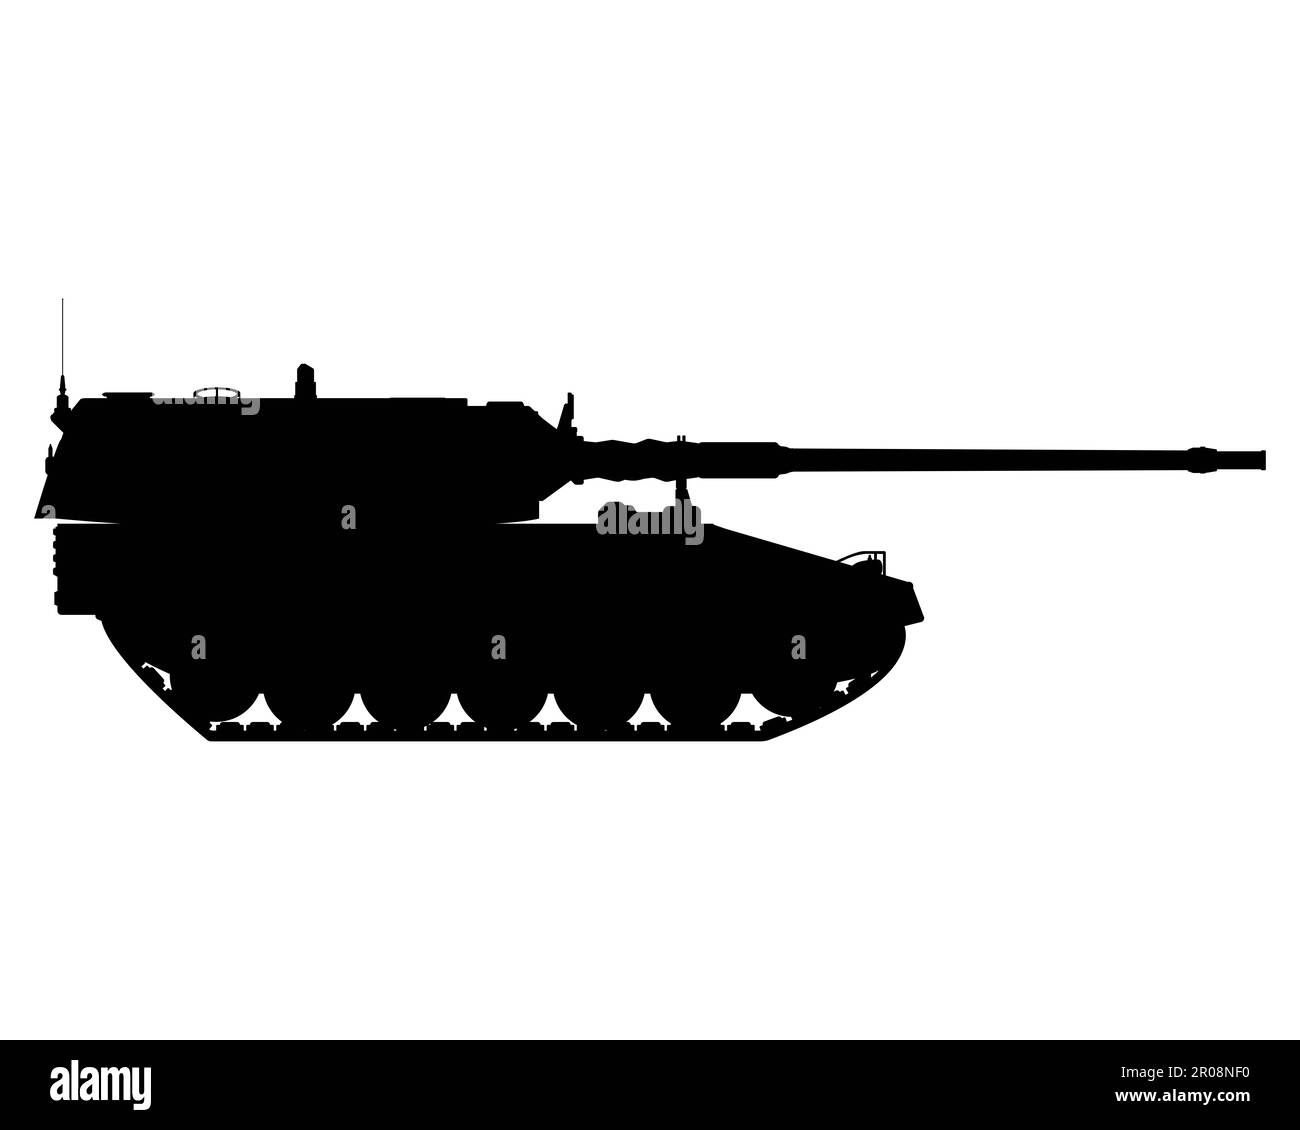 Self-propelled howitzer silhouette. German 155 mm Panzerhaubitze 2000. Military armored vehicle. Illustration isolated on white background. Stock Photo